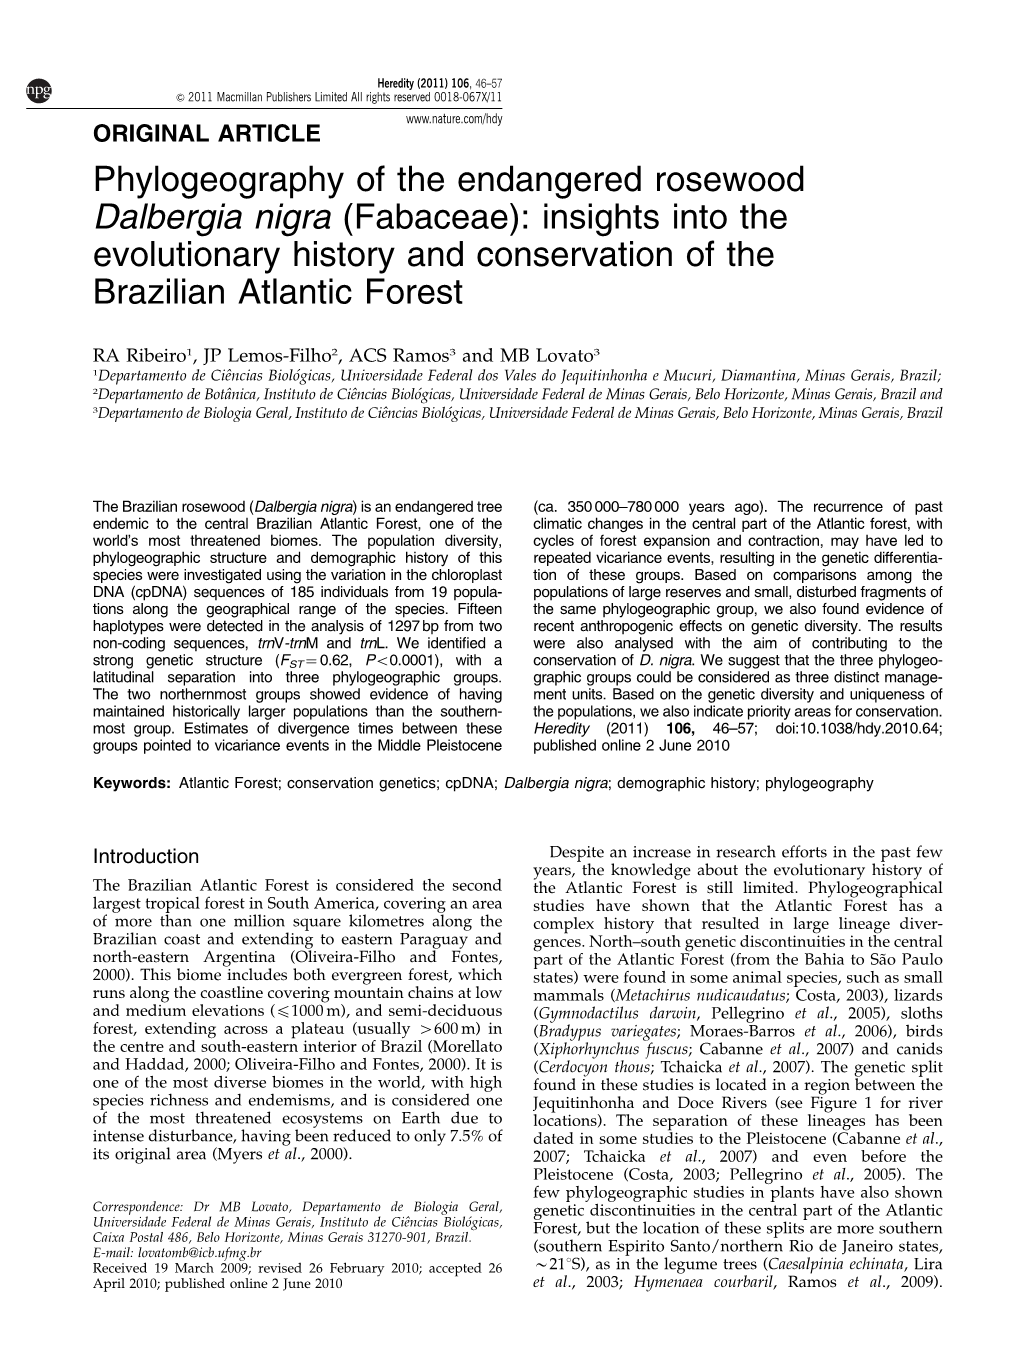 Phylogeography of the Endangered Rosewood Dalbergia Nigra (Fabaceae): Insights Into the Evolutionary History and Conservation of the Brazilian Atlantic Forest